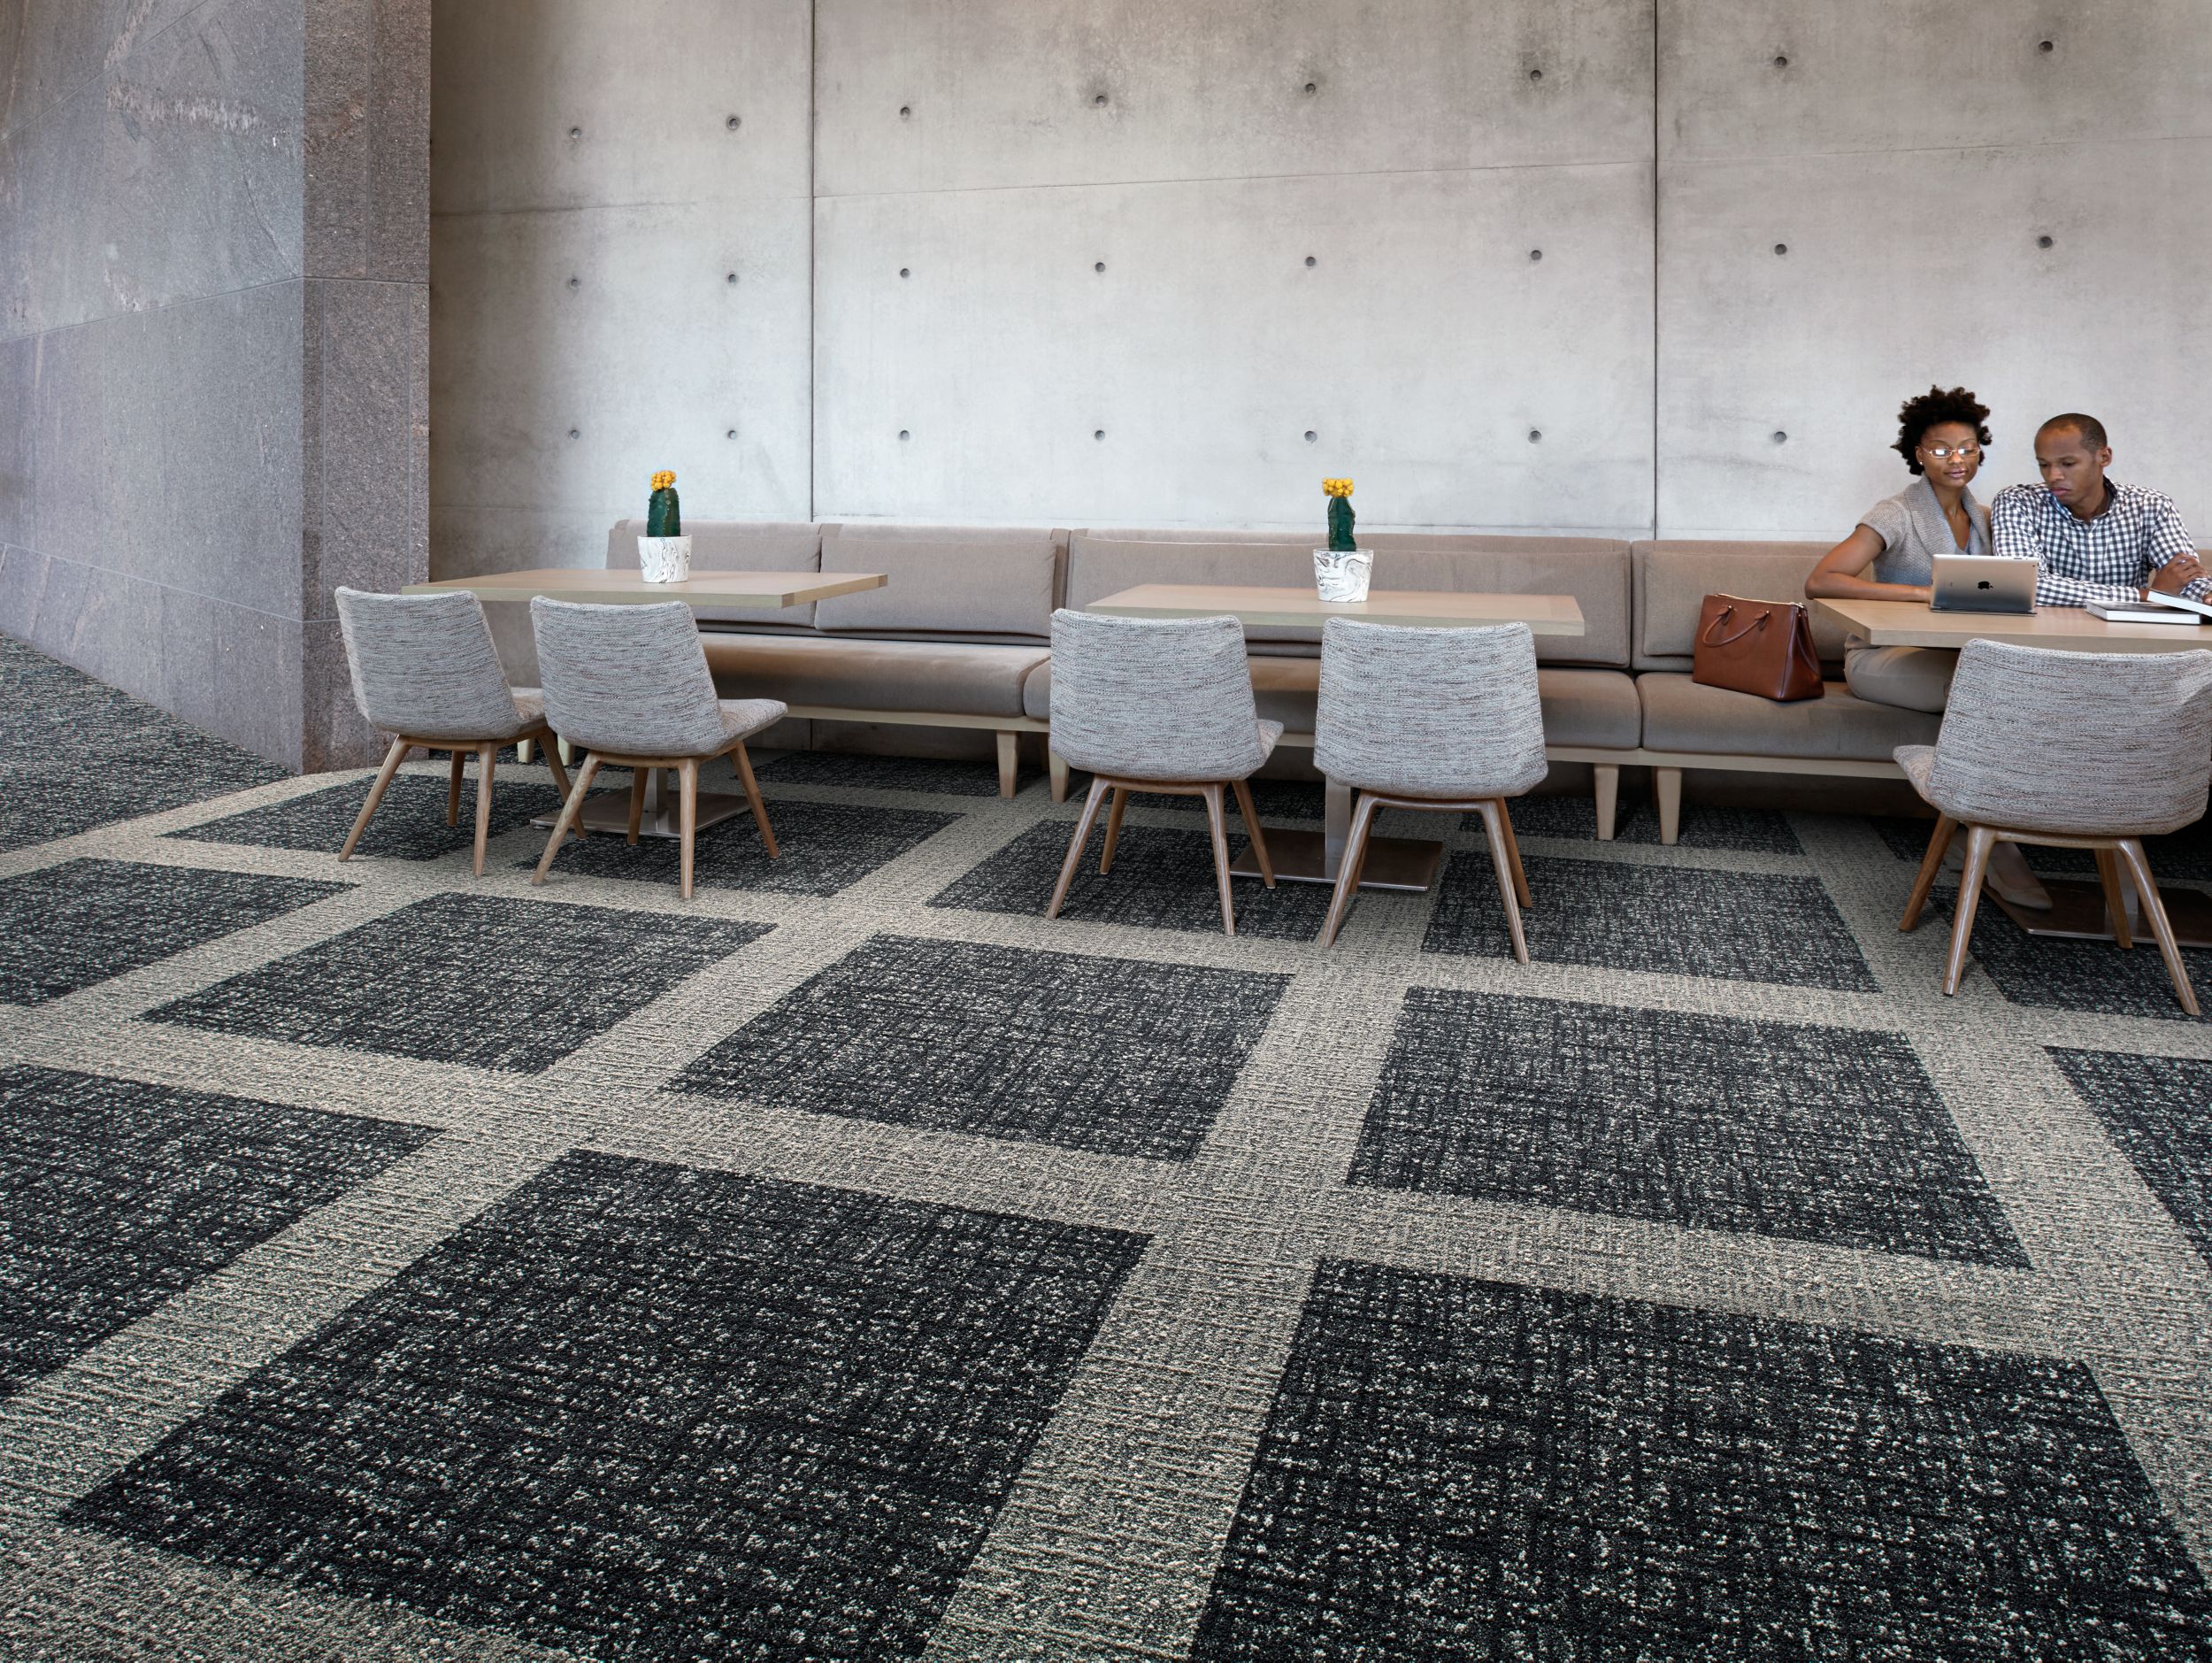 Interface WW895 plank carpet tile and Textured Woodgrains LVT in office common area with tables and chairs numéro d’image 2